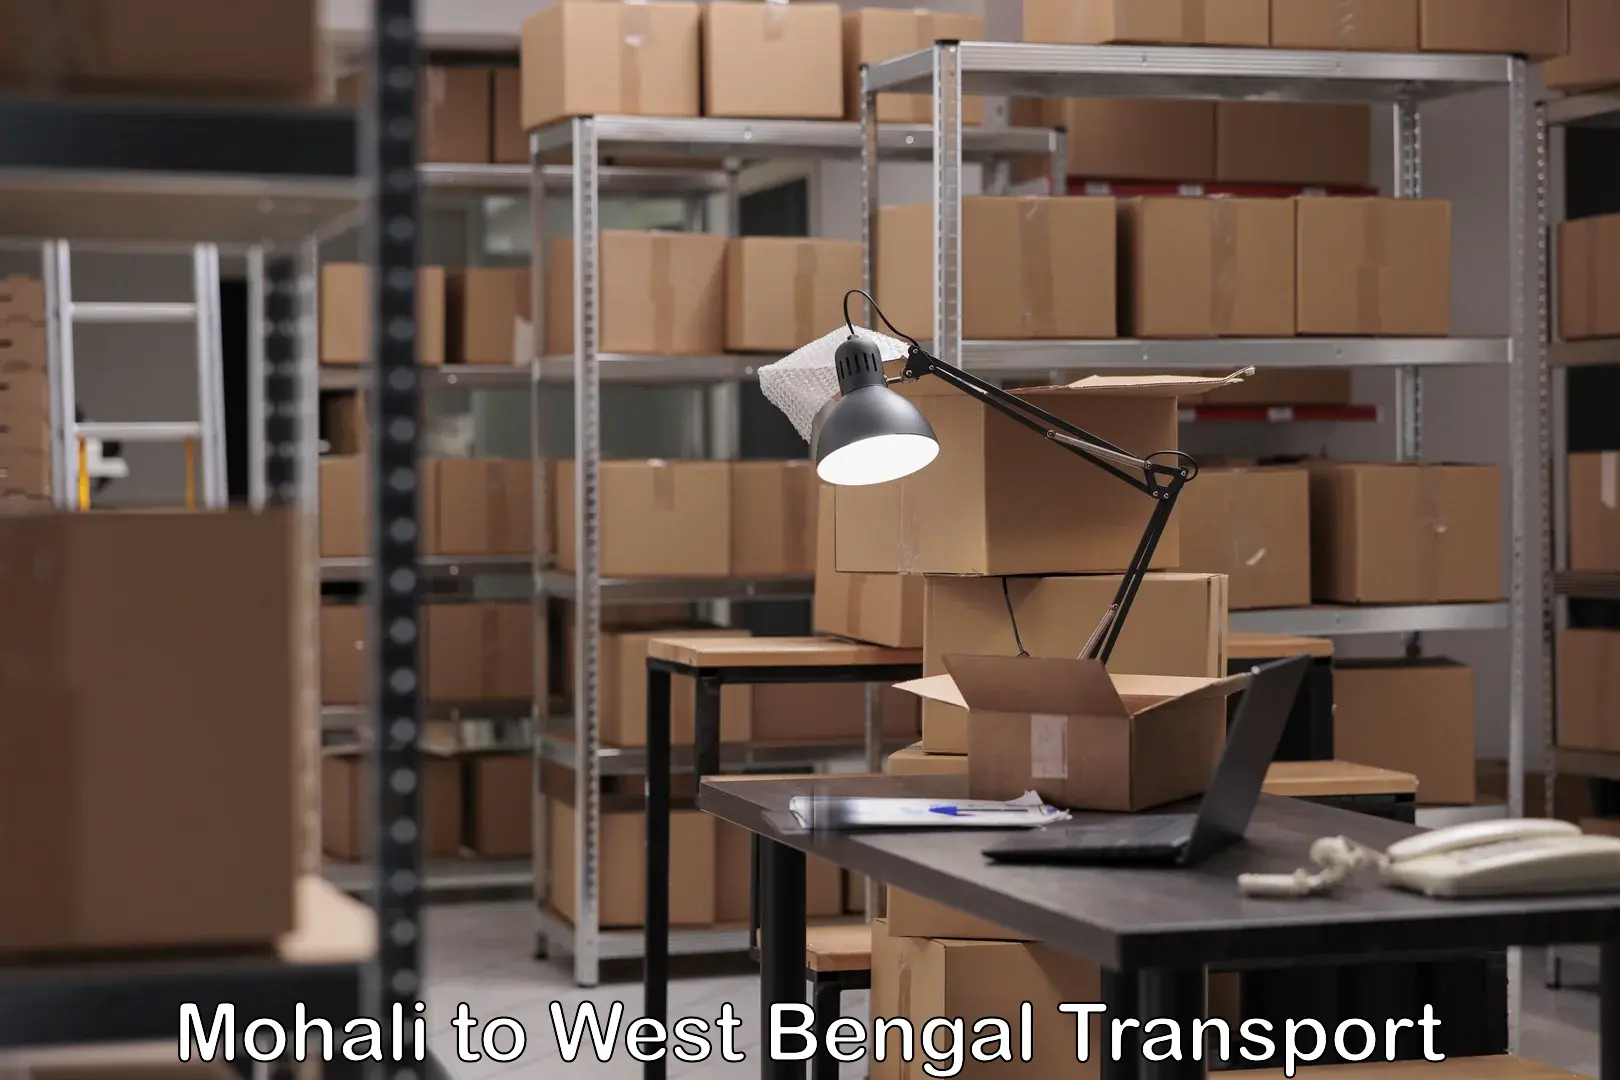 Truck transport companies in India Mohali to West Bengal